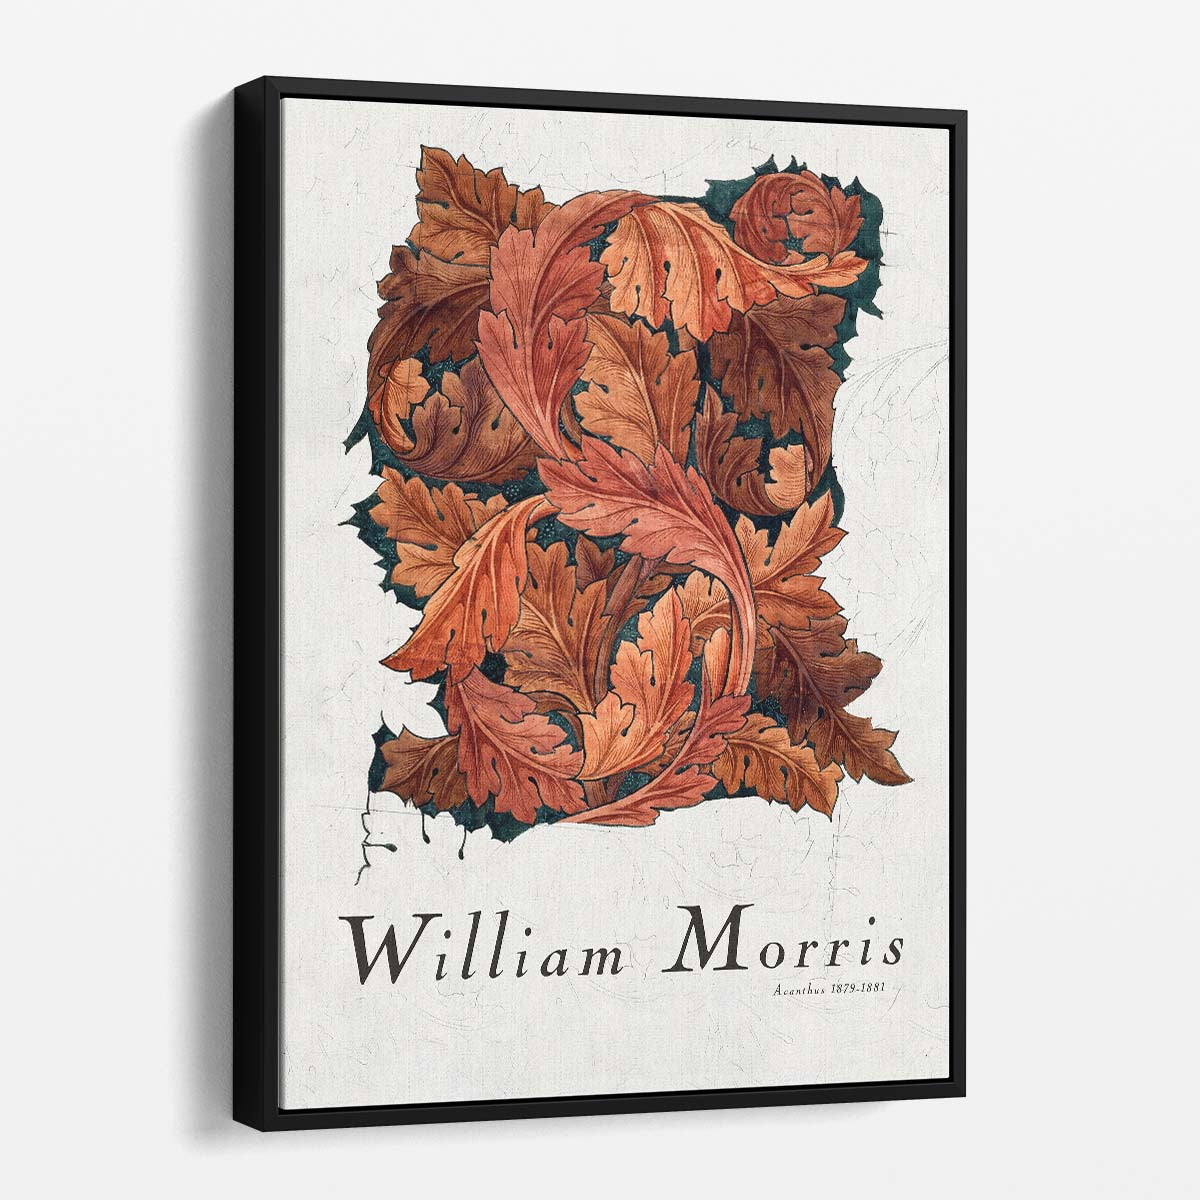 Vintage Acanthus Illustration by William Morris - Inspirational Typography Art Poster by Luxuriance Designs, made in USA